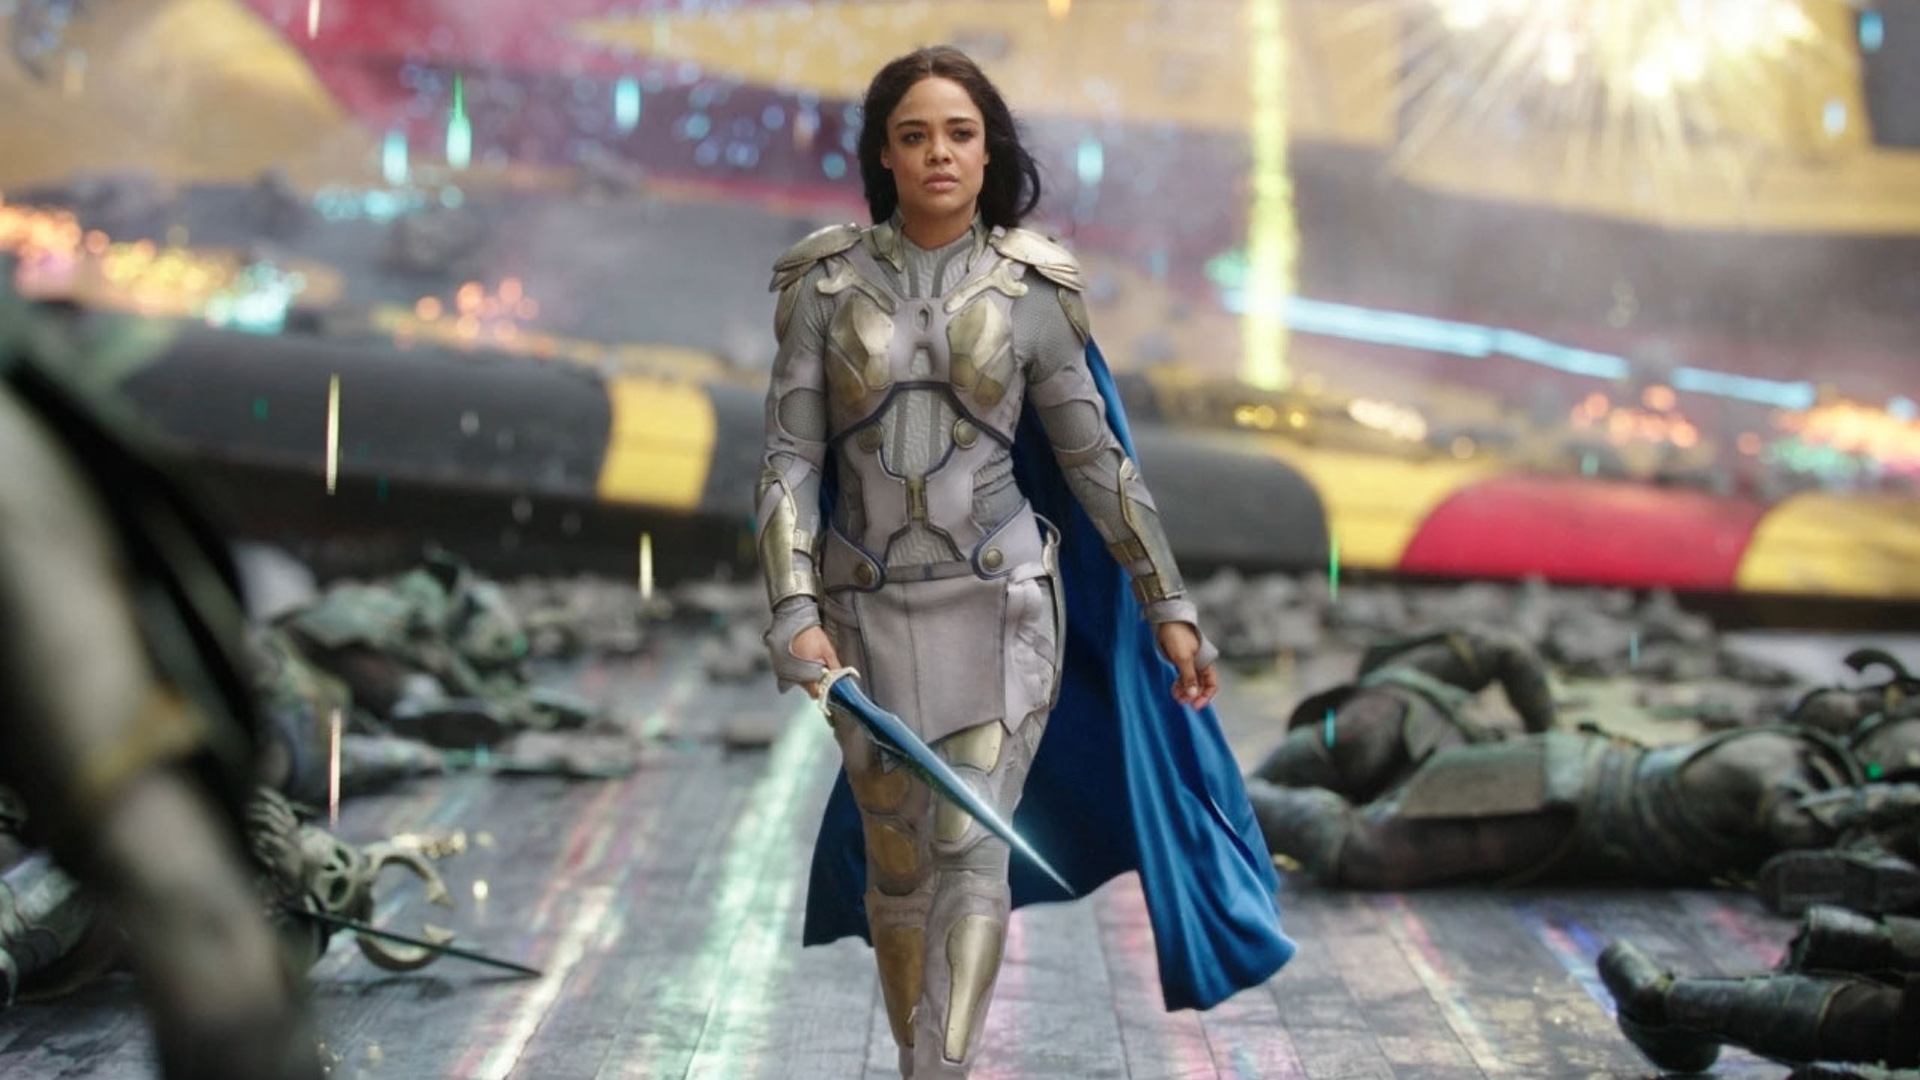 Tessa Thompson Asked Kevin Feige About Developing An All